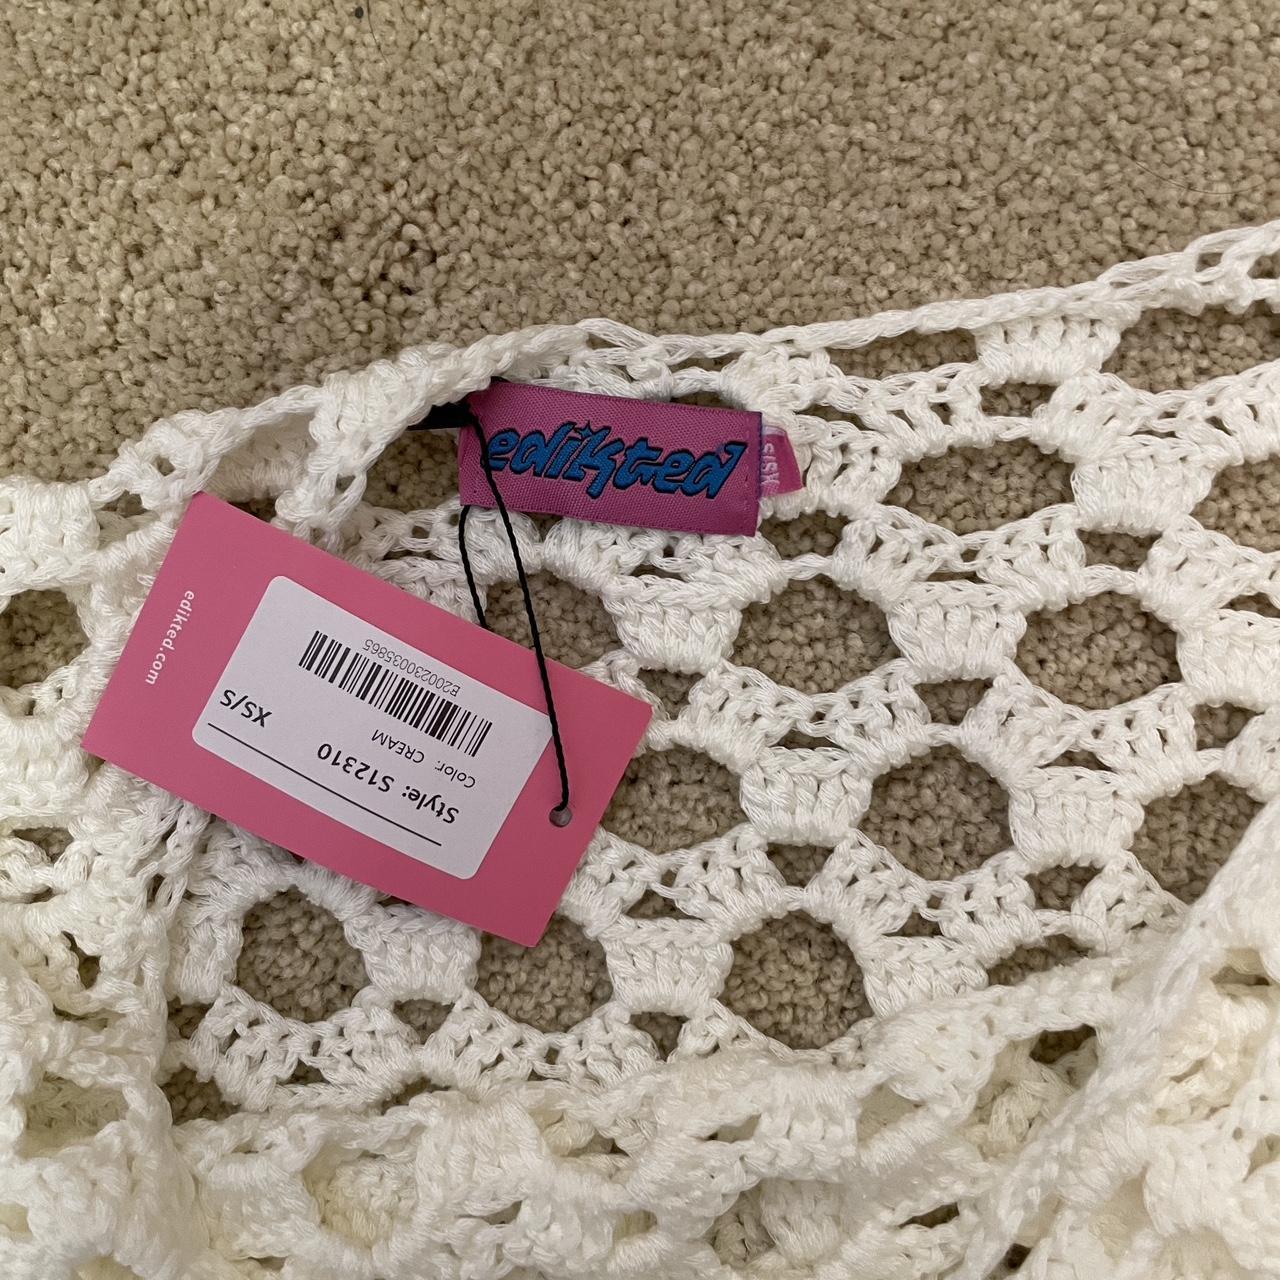 edikted crochet top NEW WITH TAGS never worn size XS/S - Depop